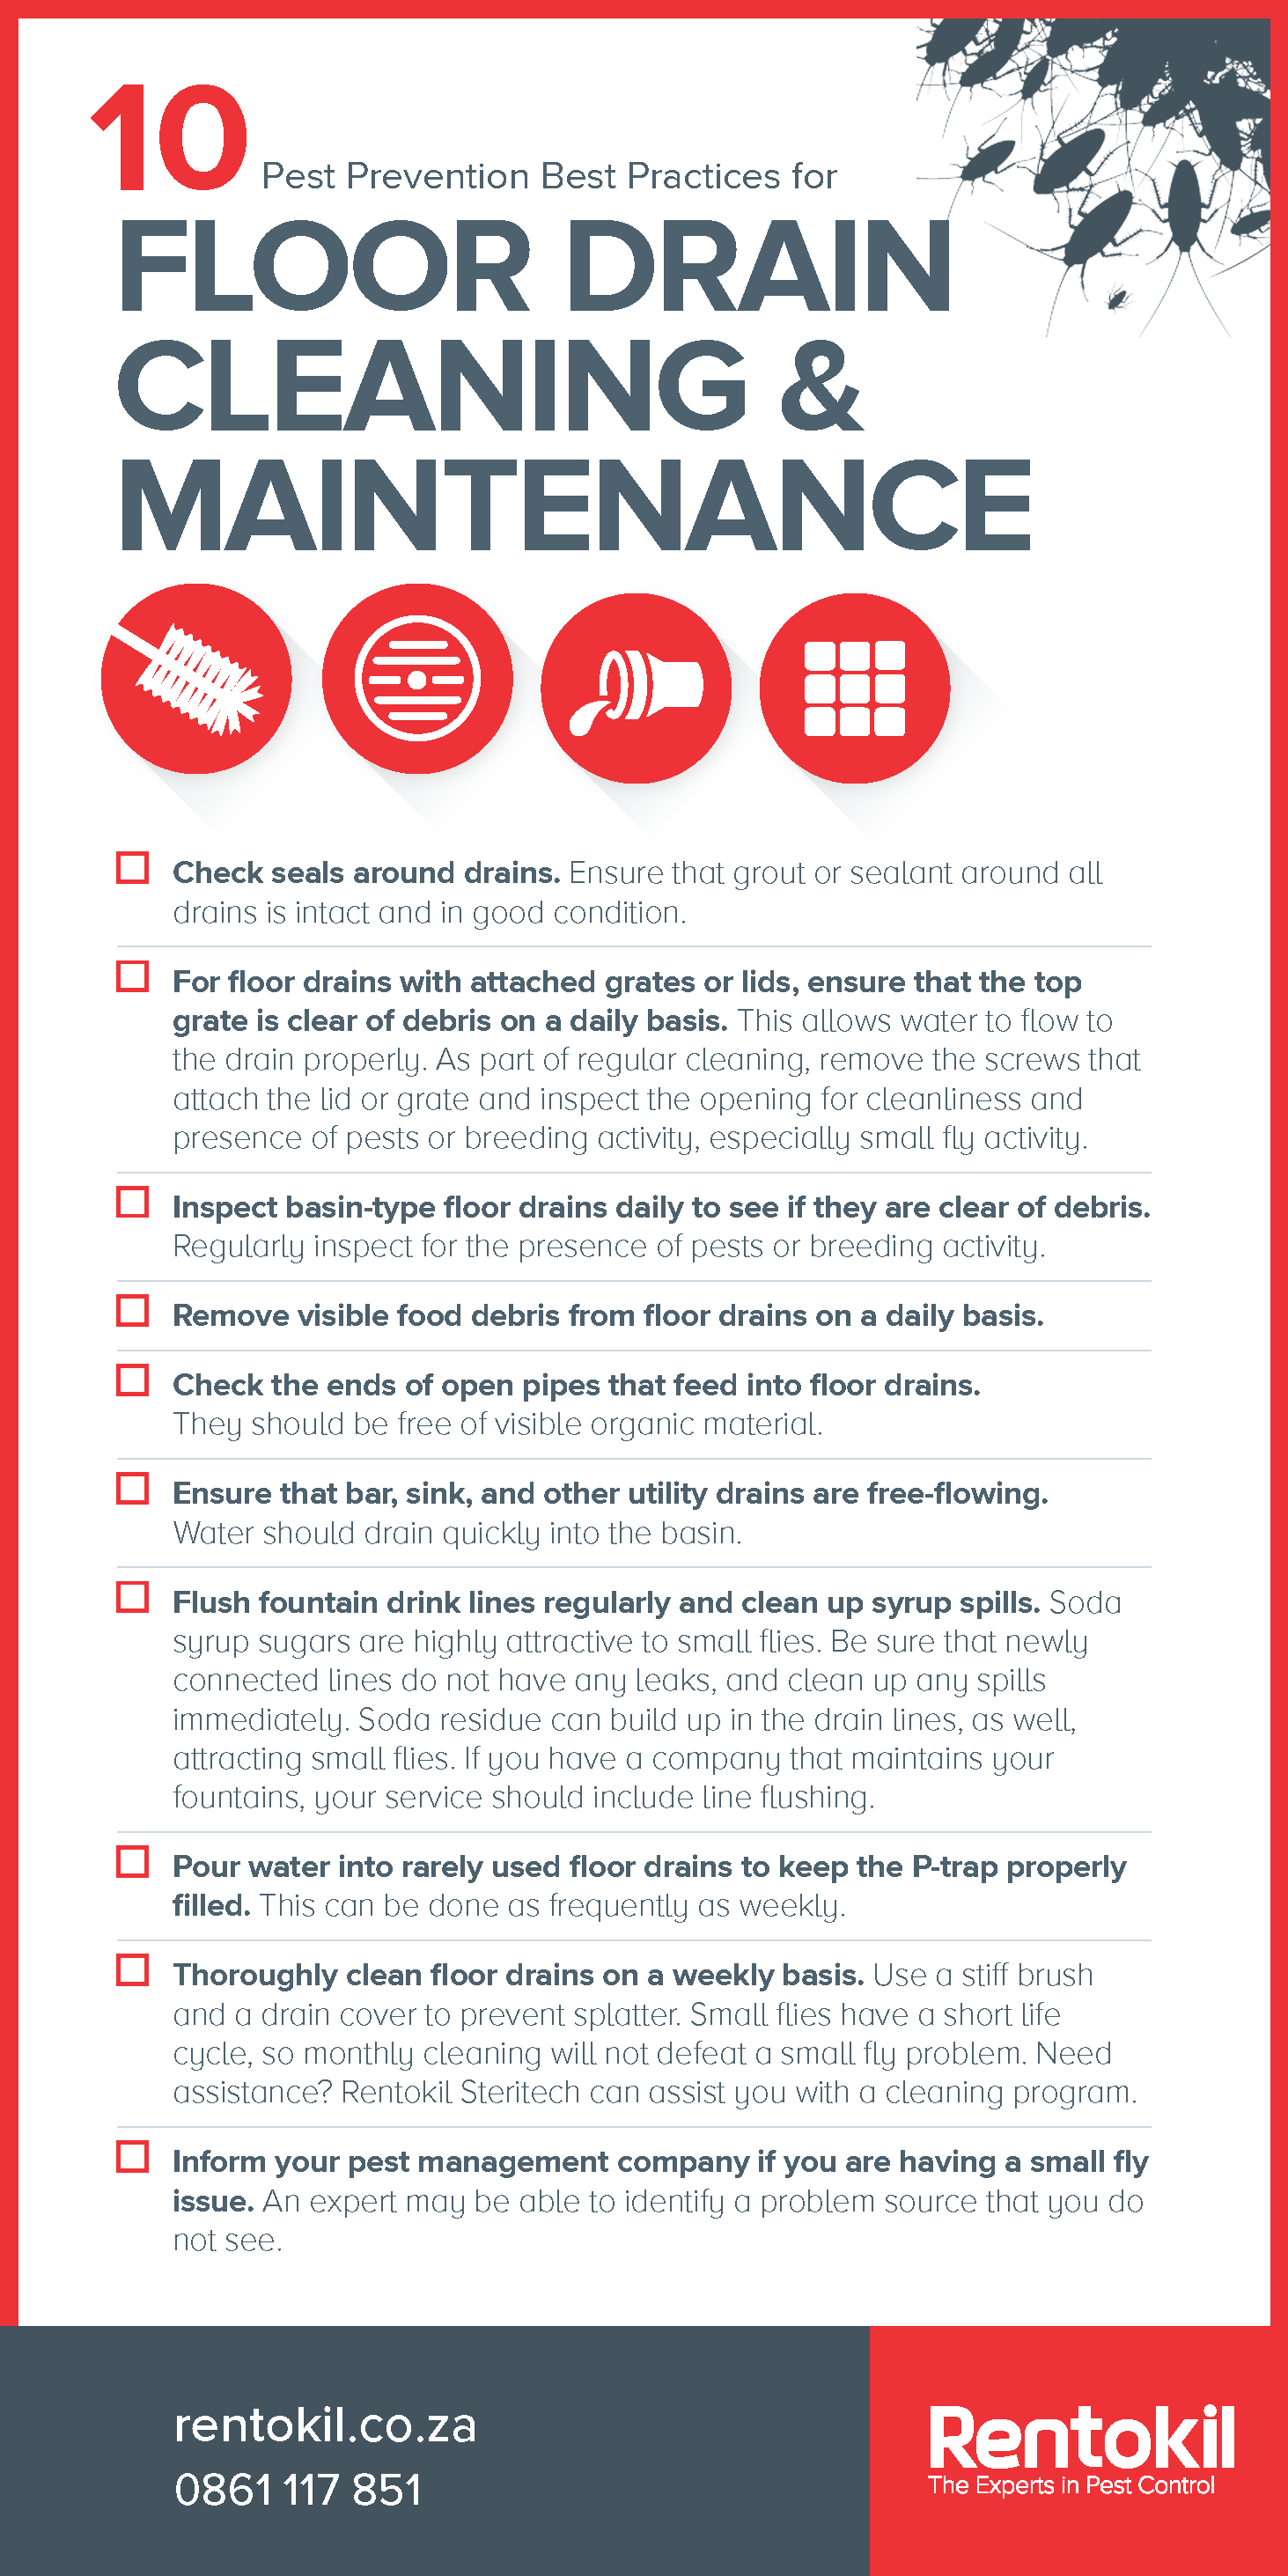 Pest Prevention Poster - 10 Best Practices for Floor Drain Cleaning and Maintenance